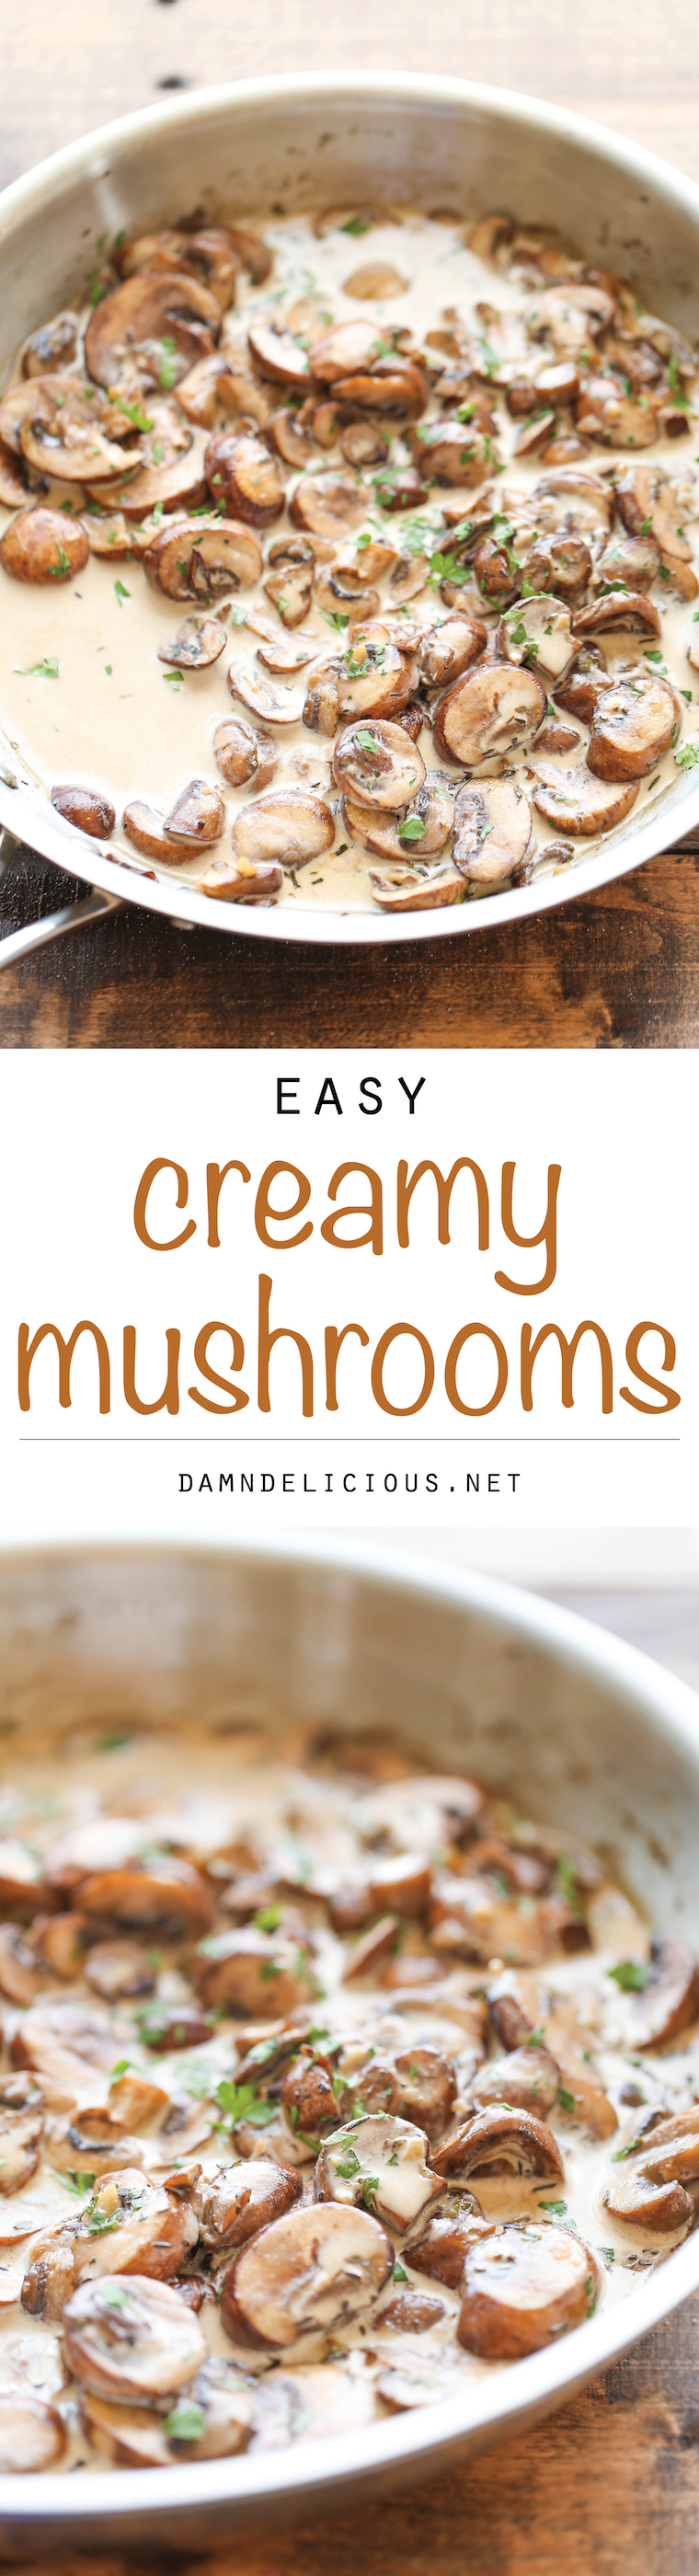 Easy Creamy Mushrooms  -  The easiest, creamiest mushrooms you will ever have – it’s so good, you’ll want to skip the main dish and make this a meal instead!